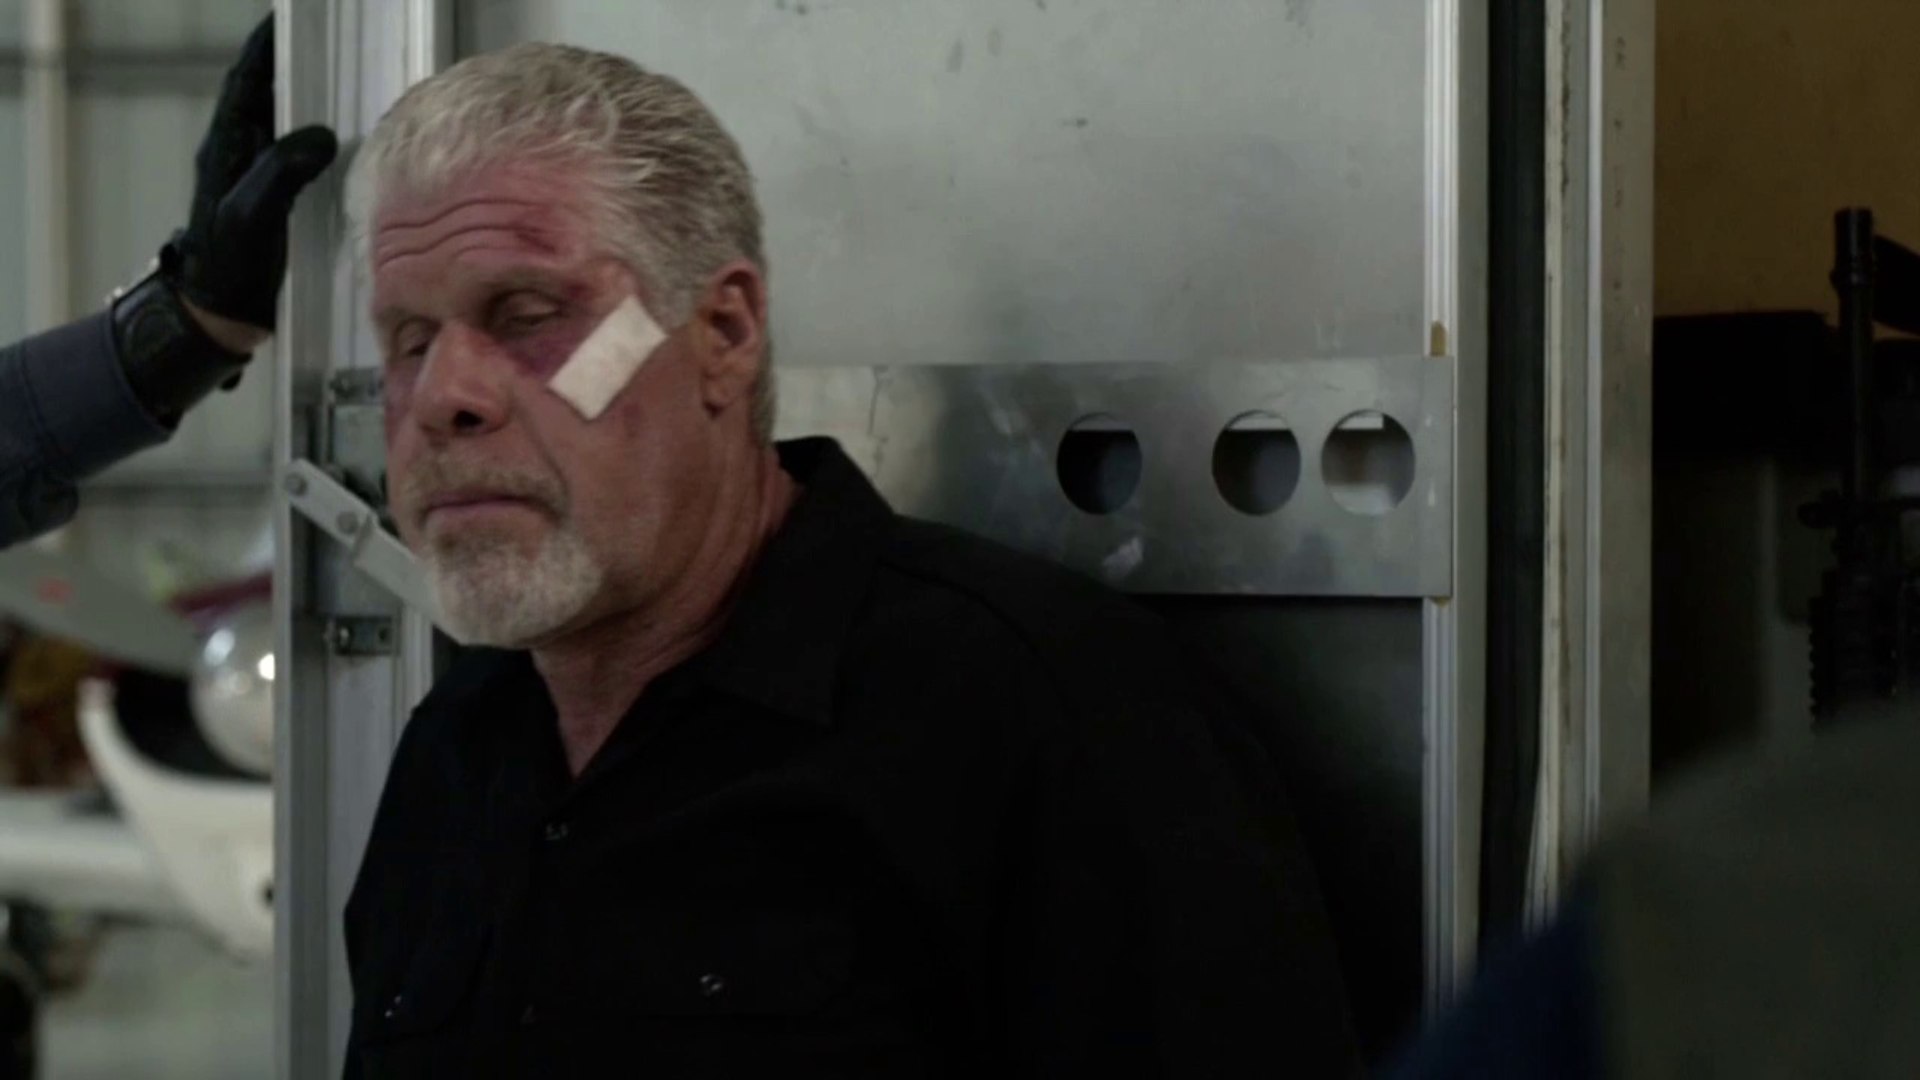 Sons of Anarchy Season 6 - Clip 3 - Clays Realization HD - video Dailymotion